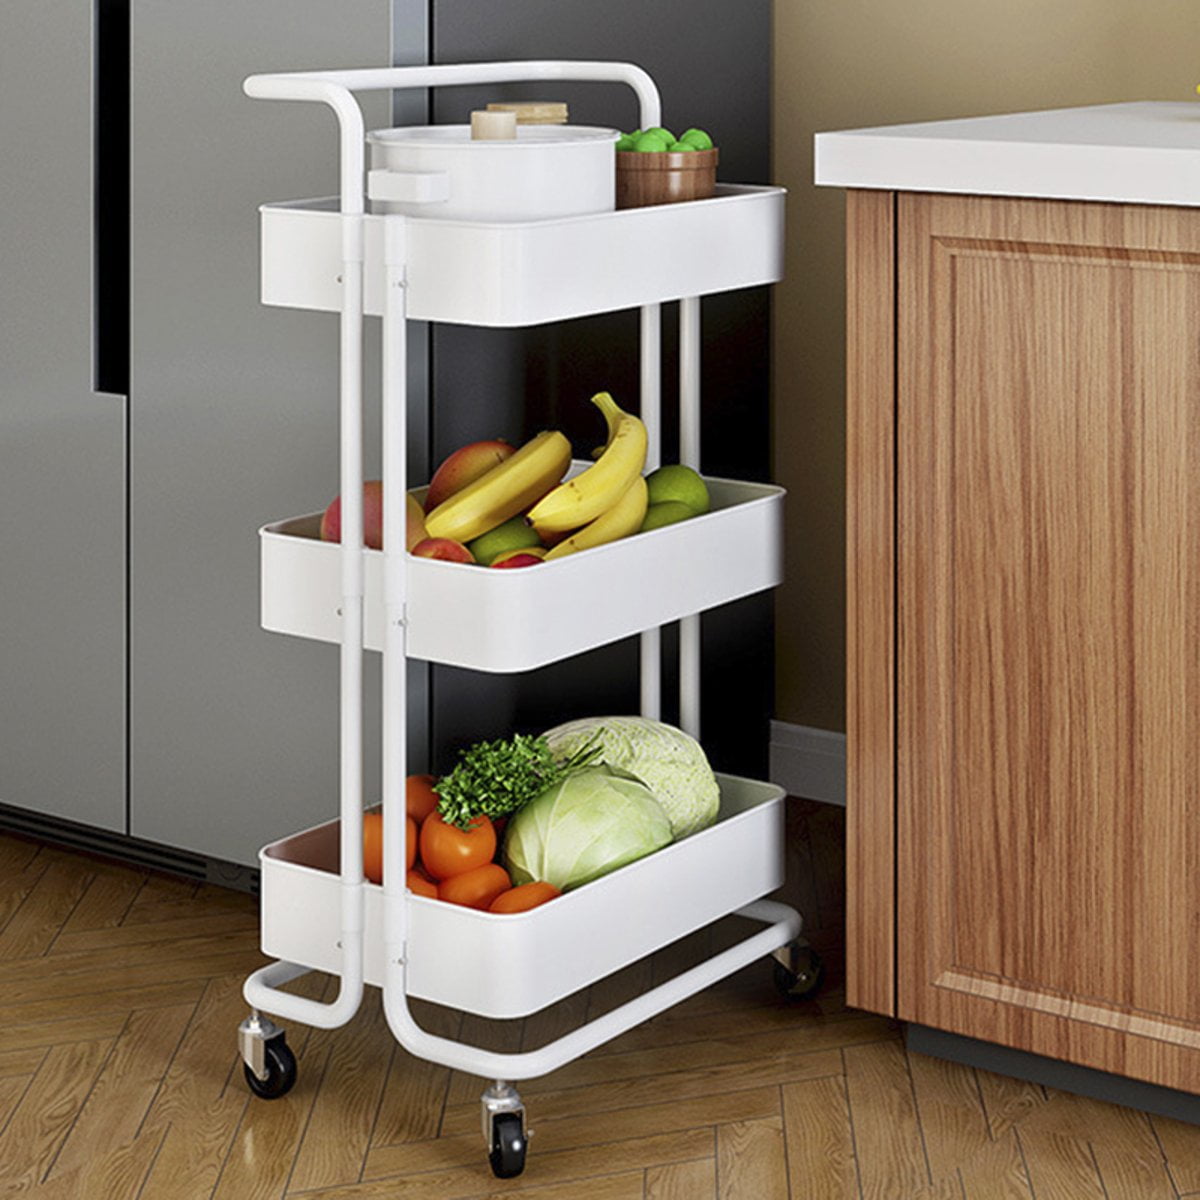 Black Ceeyali 3-Tier Utility Rolling Cart Storage Organizer Shelf Multifunction Storage Cart with Handle and Lockable Wheels for Home Kitchen,Bathroom,Office,Laundry Room etc.